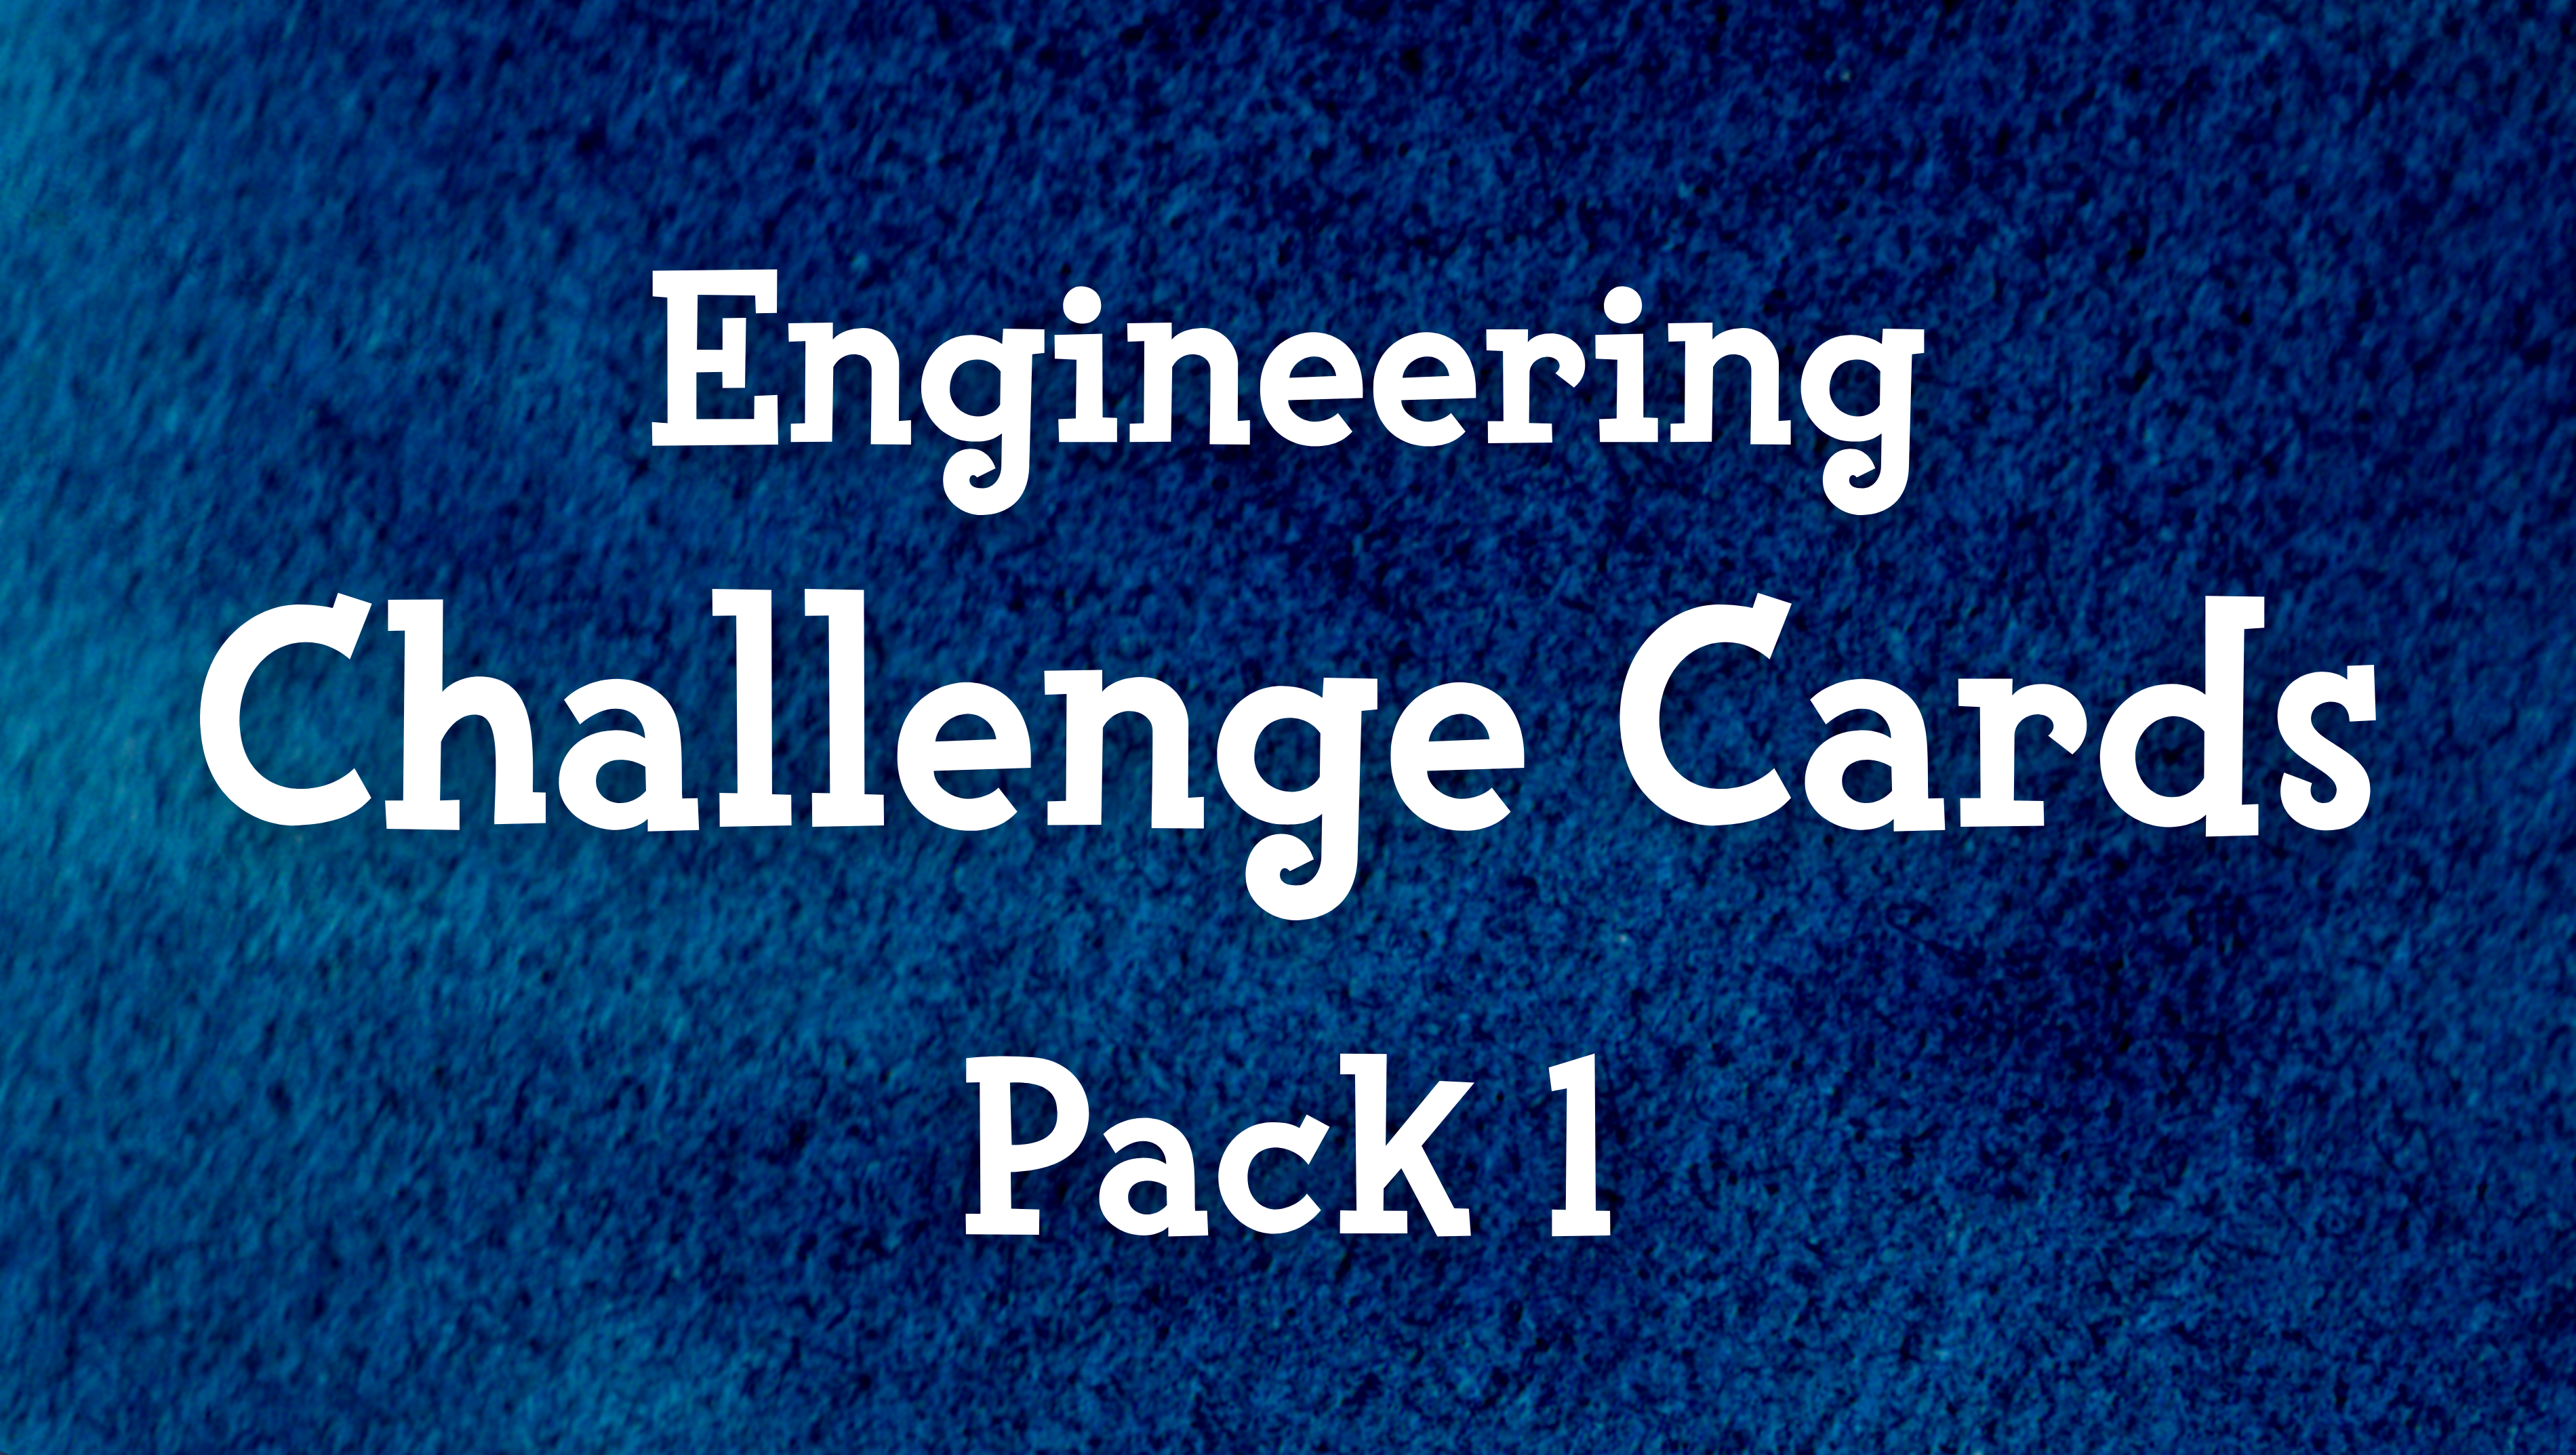 Engineering Challenge Cards Pack 1